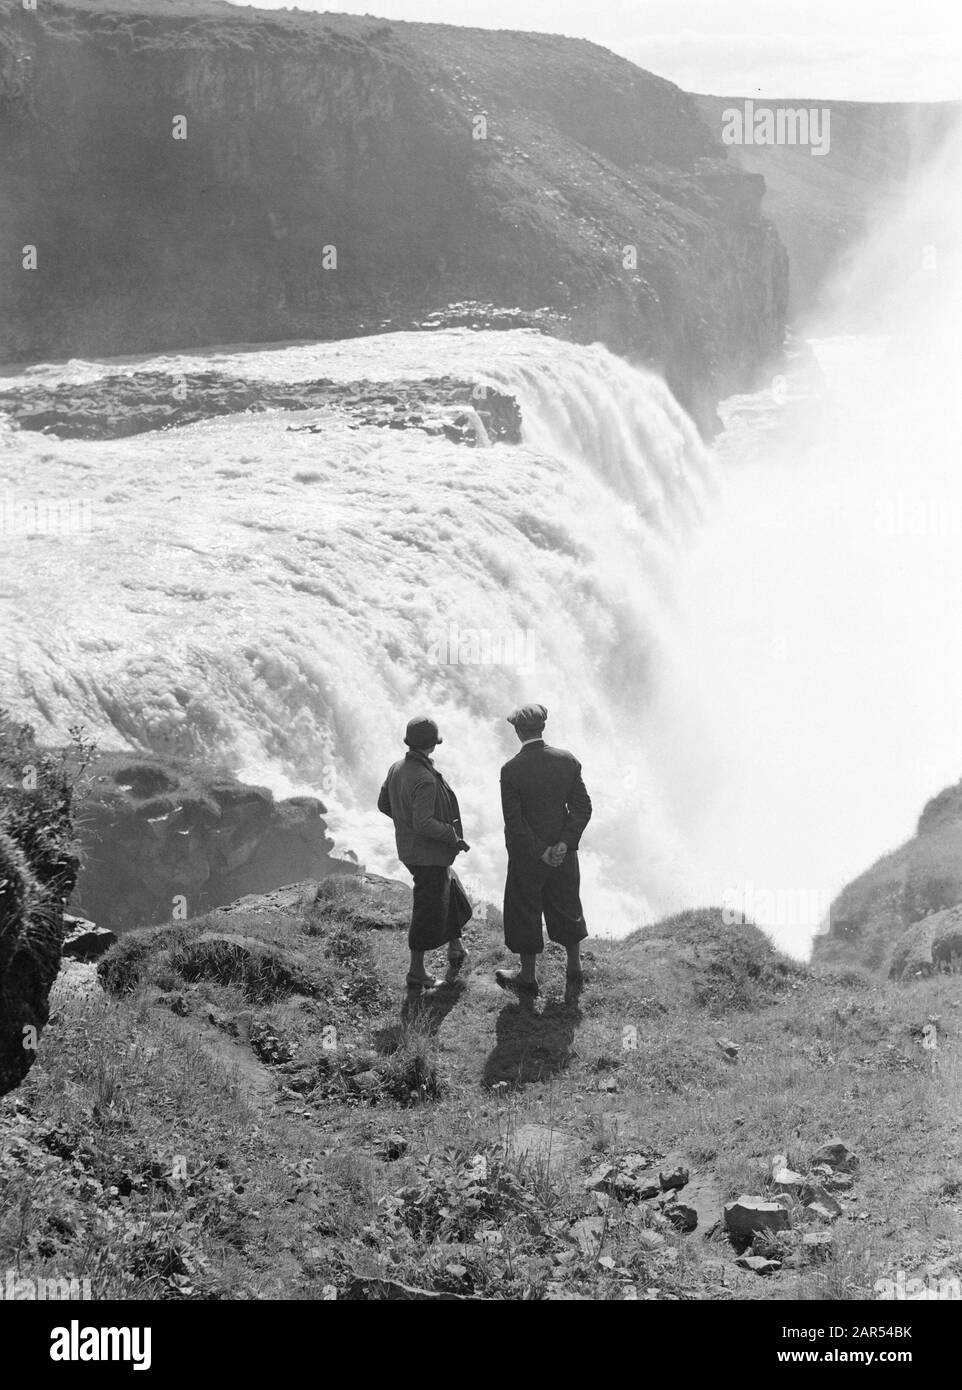 Iceland  Gullfoss. Journalist Anita Joachim together with the Icelandic guide Jonsson at the waterfalls in the Hvítá (White River) in South Iceland Date: 1934 Location: Gullfoss, Iceland Keywords: guides, hills, journalists, landscapes, rivers, waterfalls Stock Photo